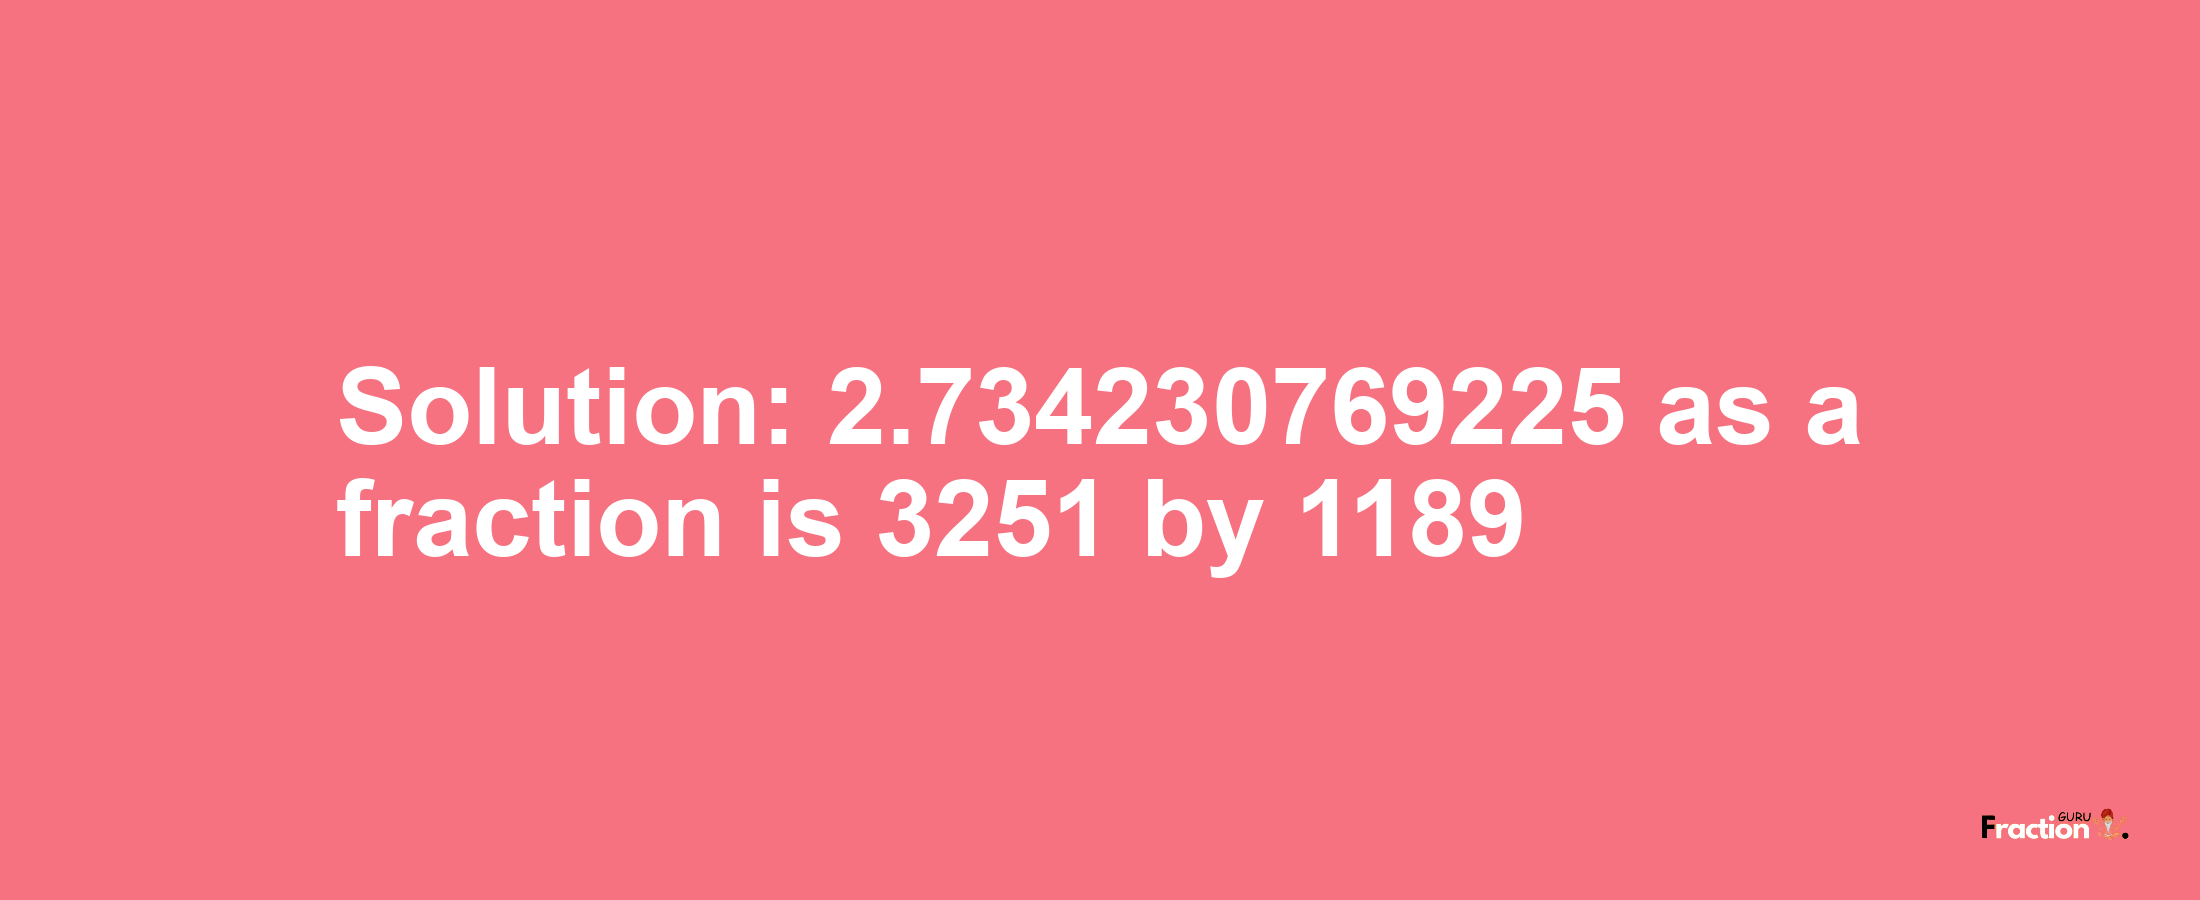 Solution:2.734230769225 as a fraction is 3251/1189